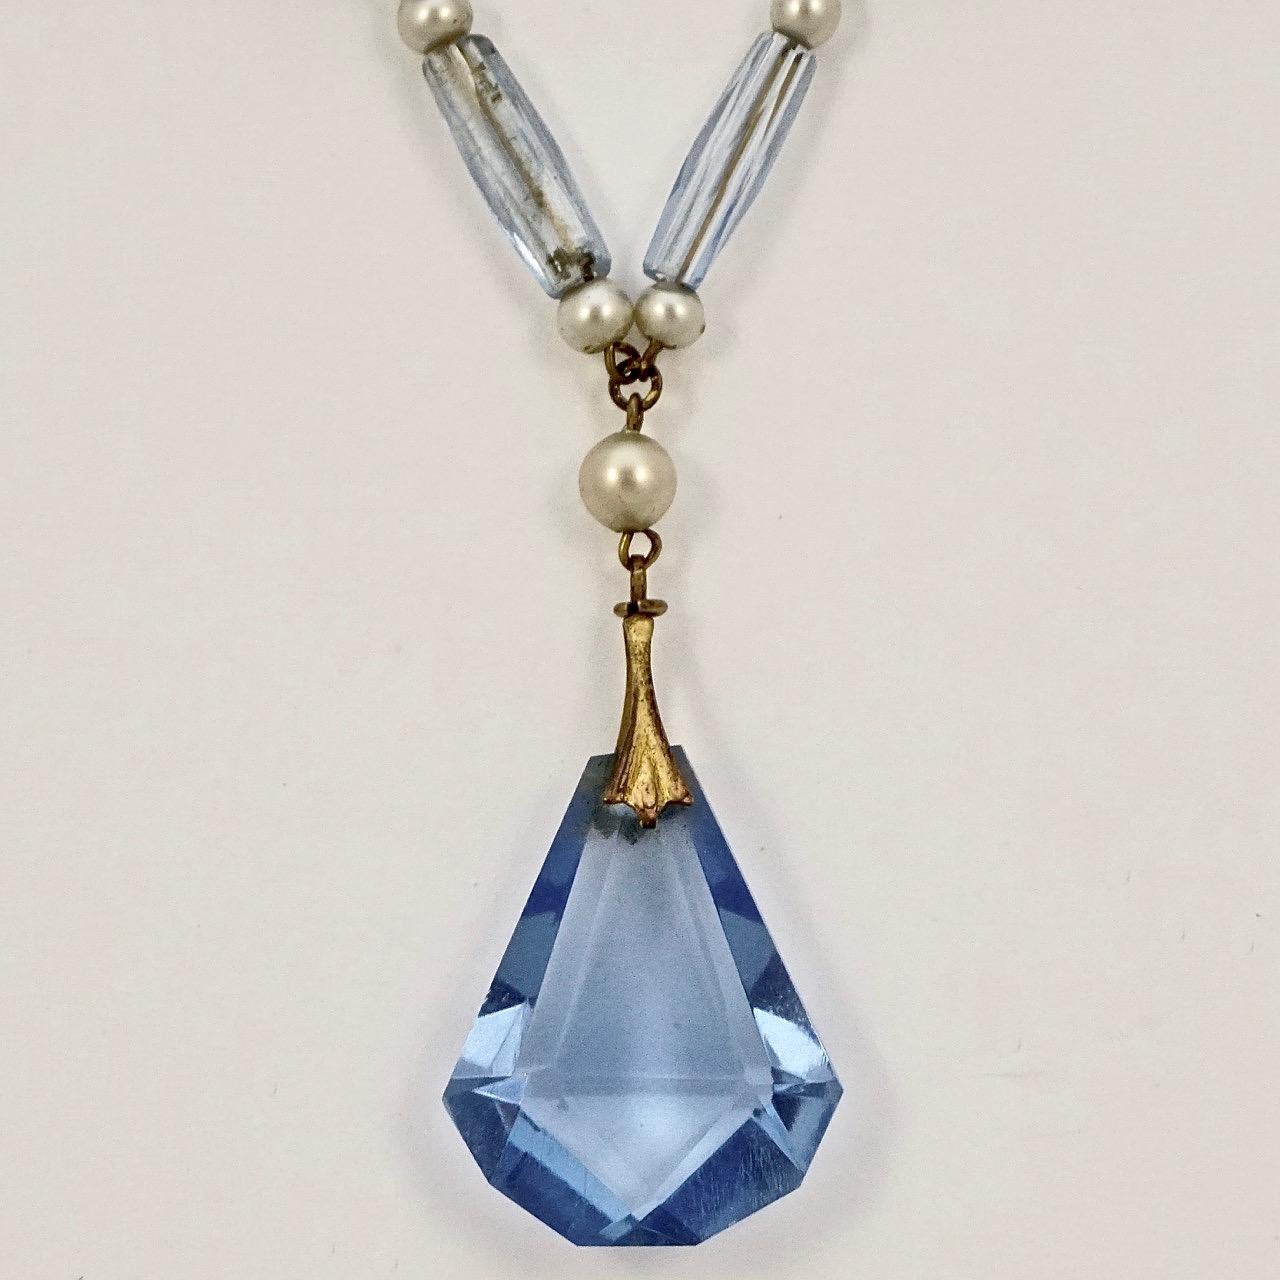 Beautiful Art Deco gold tone necklace, featuring pale and mid blue glass beads with faux pearls, and a drop pendant. Measuring length 41.7 cm / 16.4 inches, and the glass drop is length 2.1 cm / .8 inch.

This is a very pretty blue glass and pearl